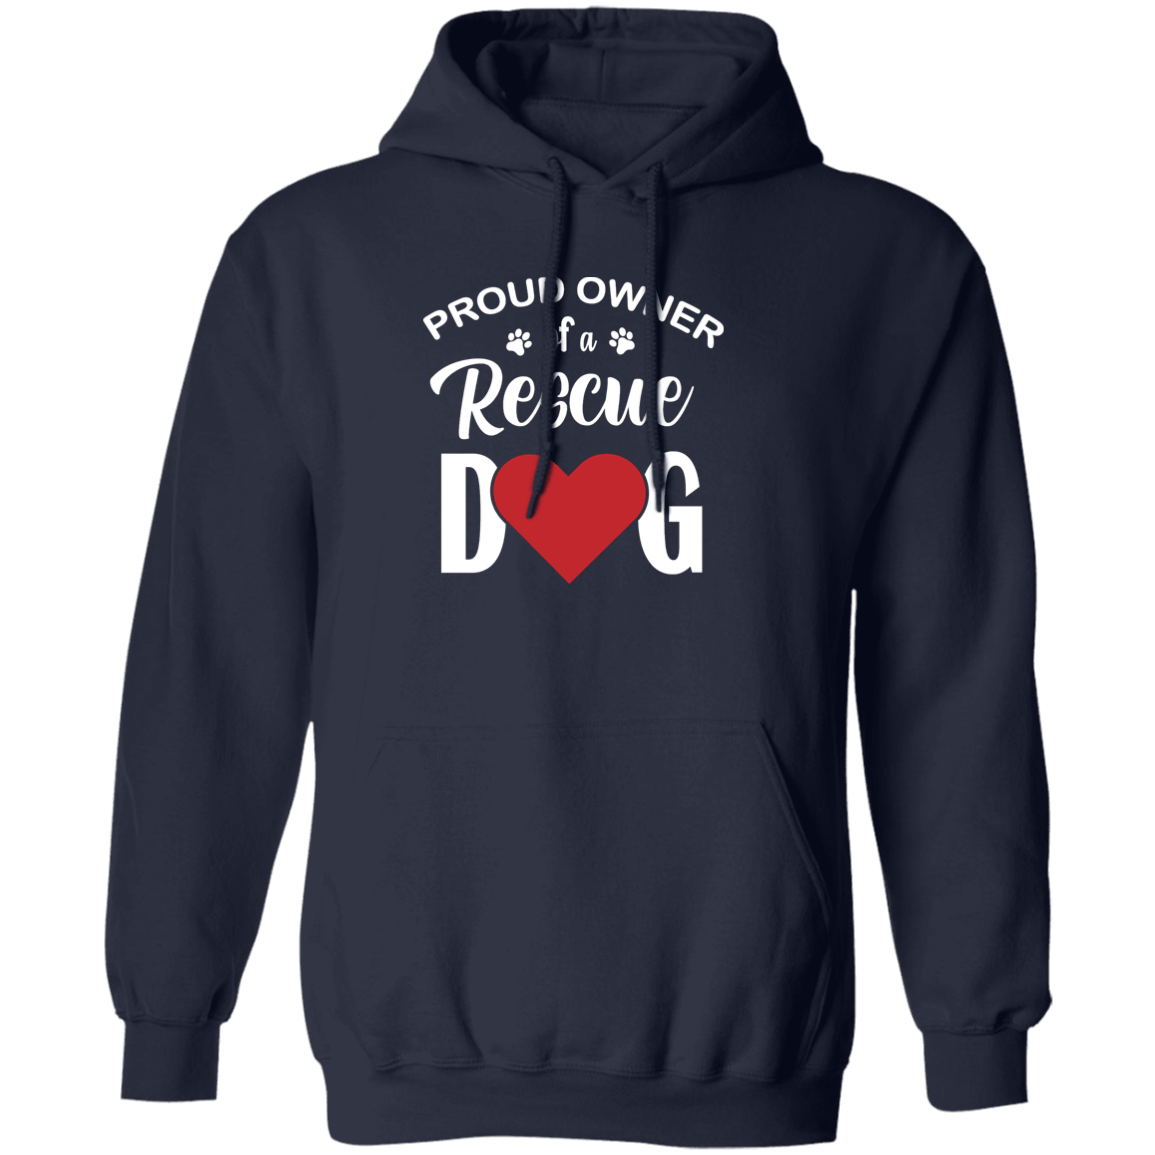 Proud Owner Of A Rescue Dog - Hoodie.